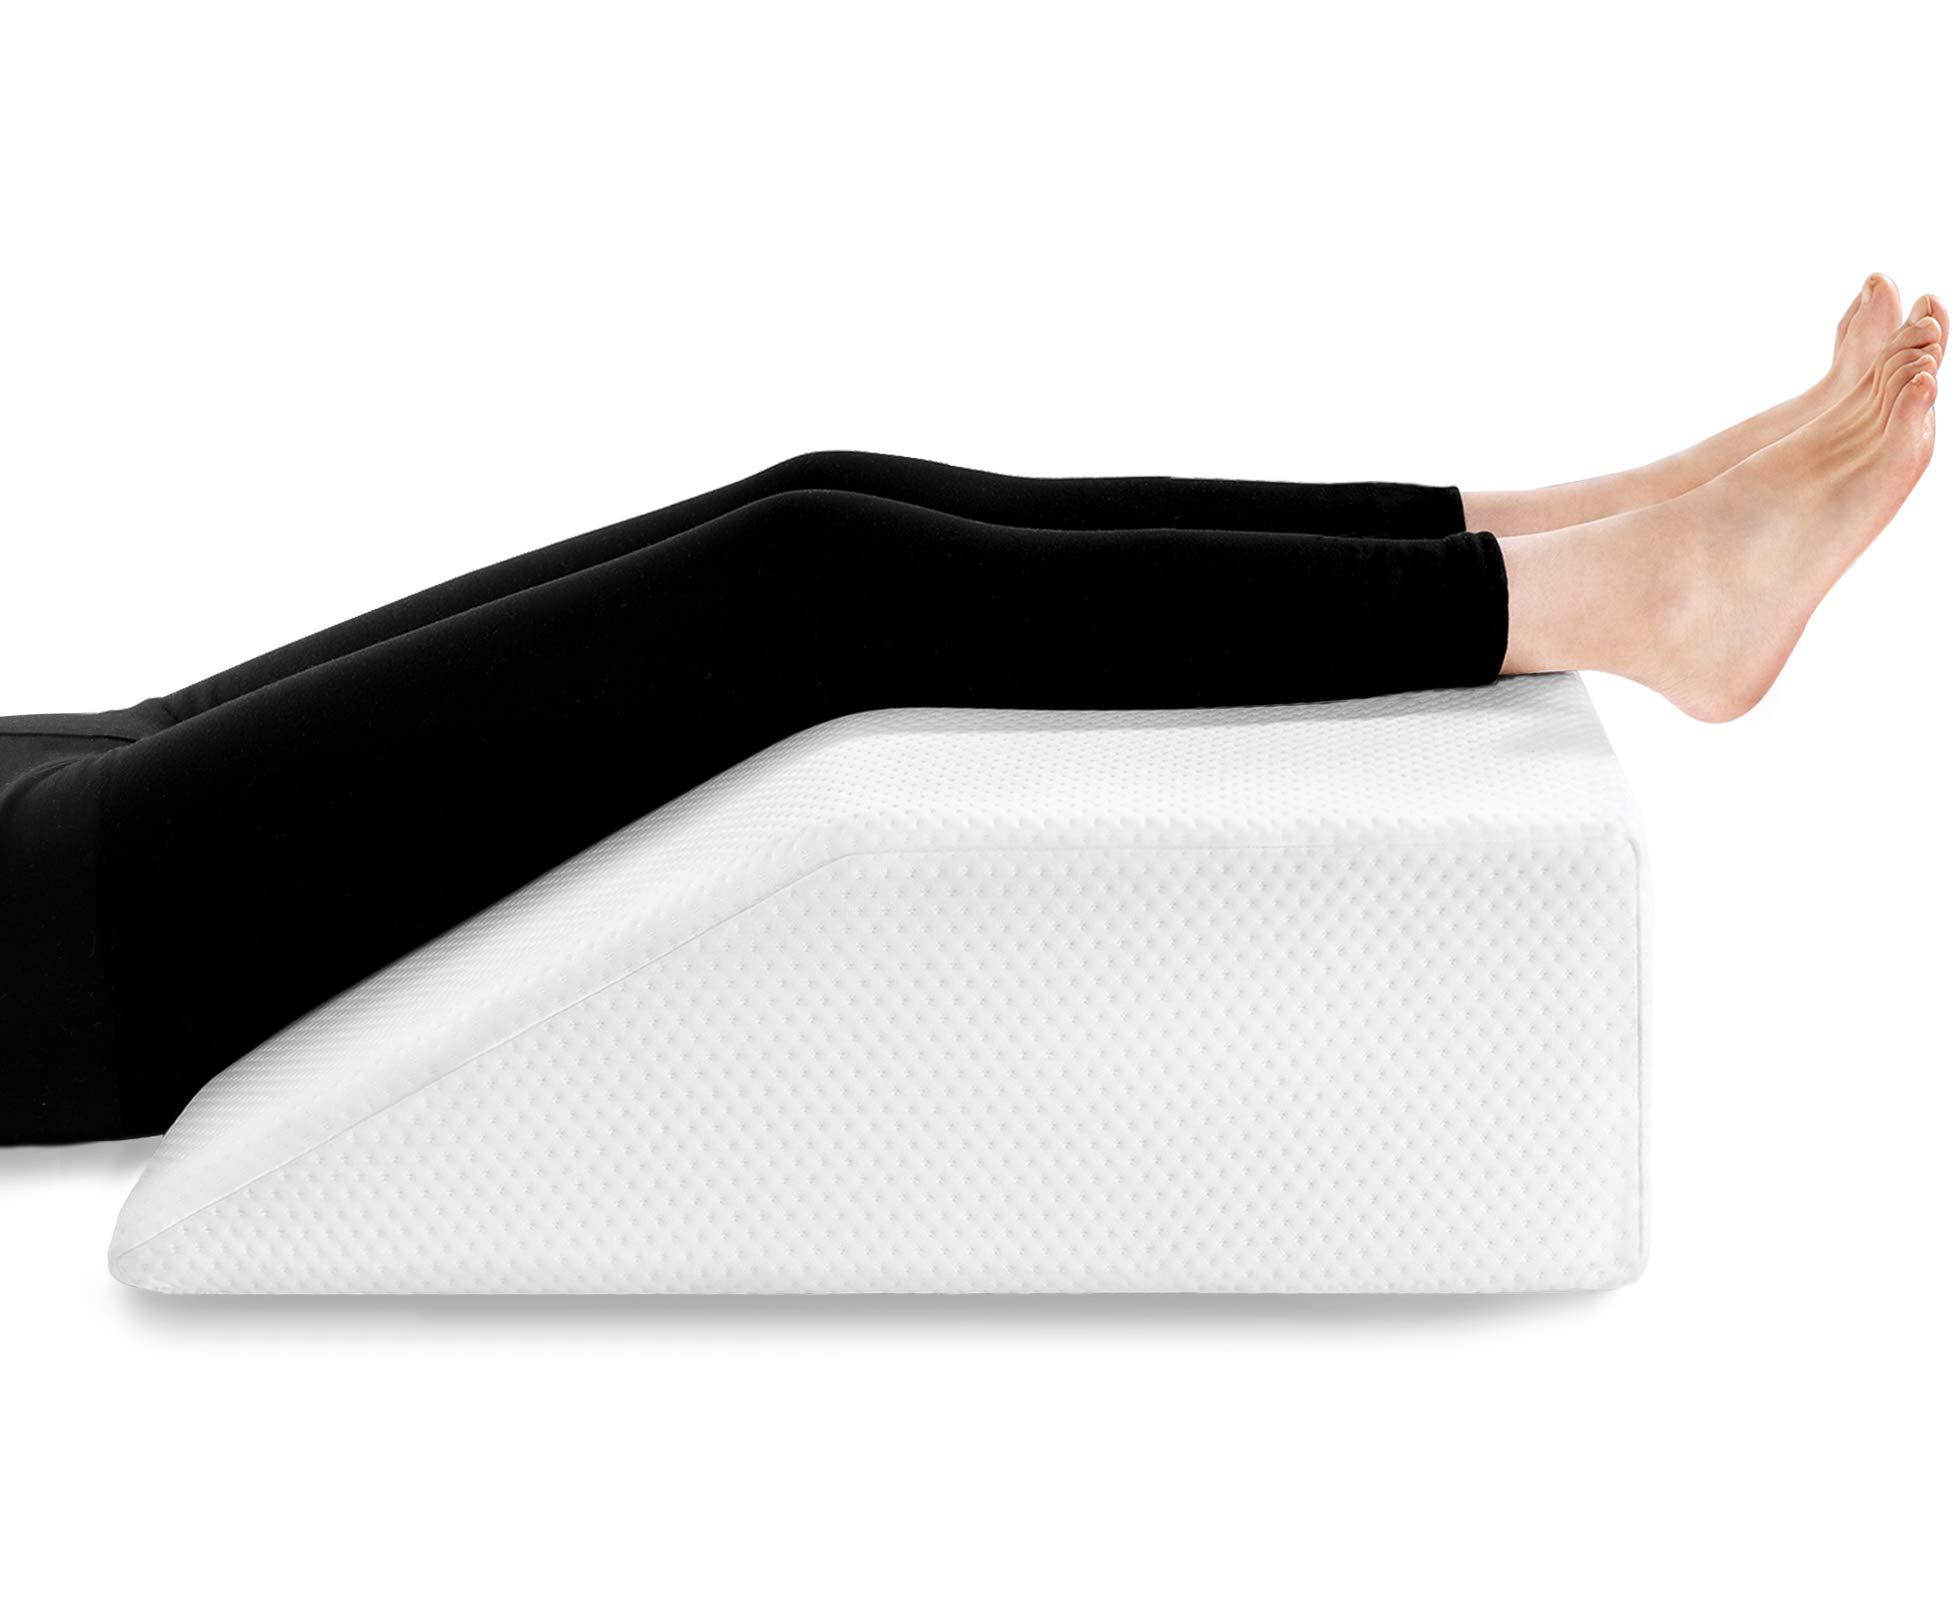 Angle Leg Wedge Pillow with 1 Memory Foam – Foam Support